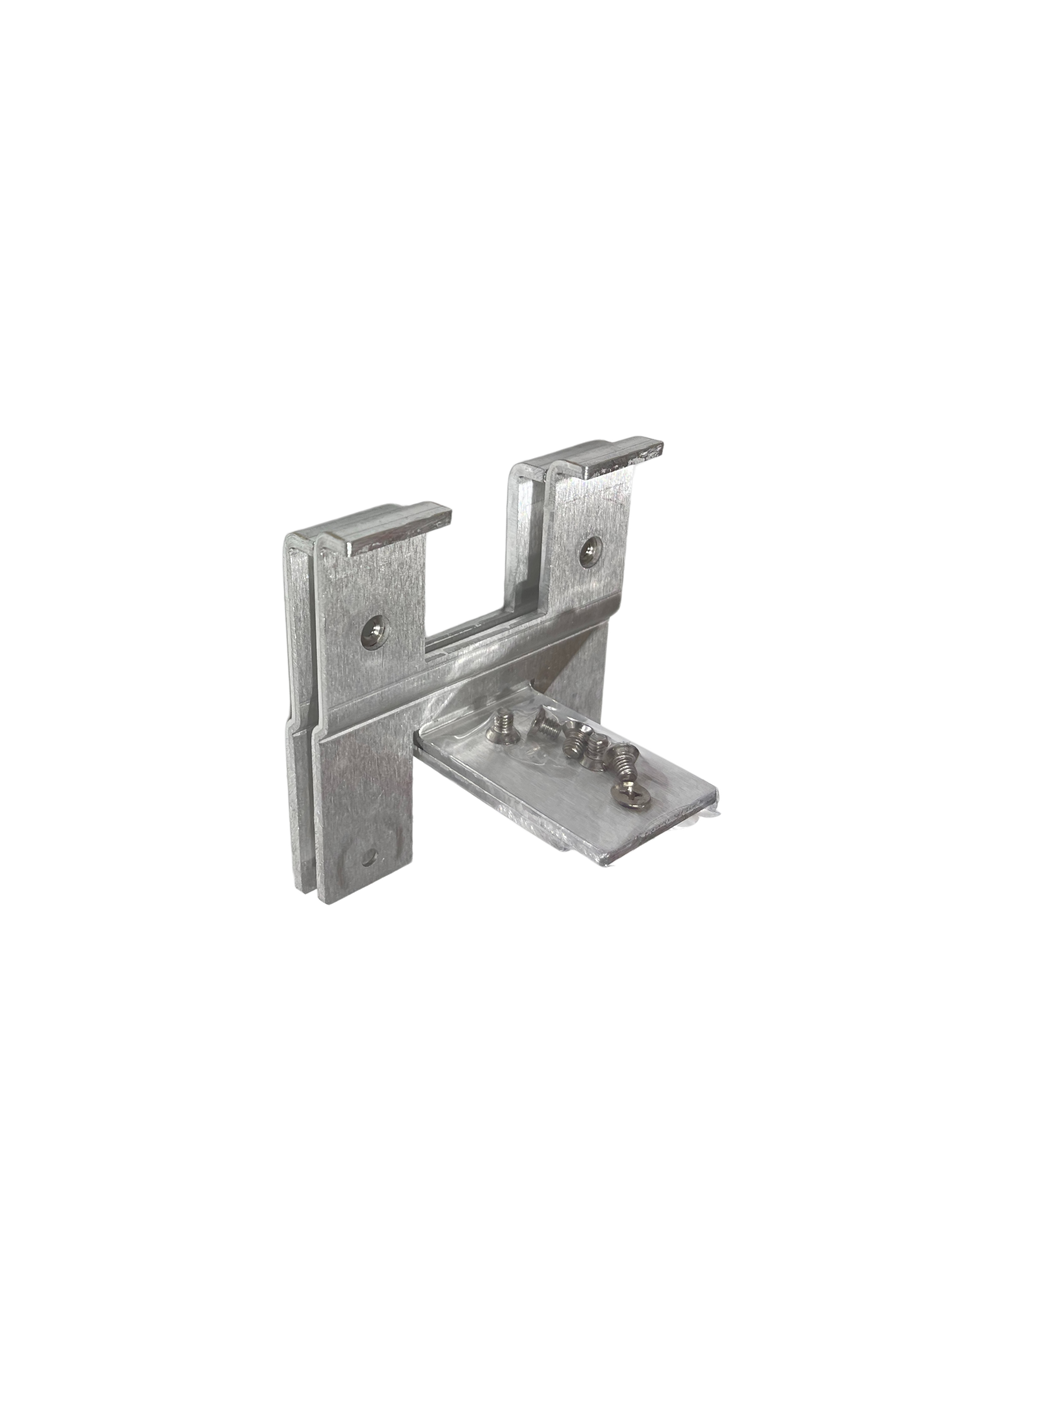 Towa Tools Stacking Brackets, TTPDM120S Accessories